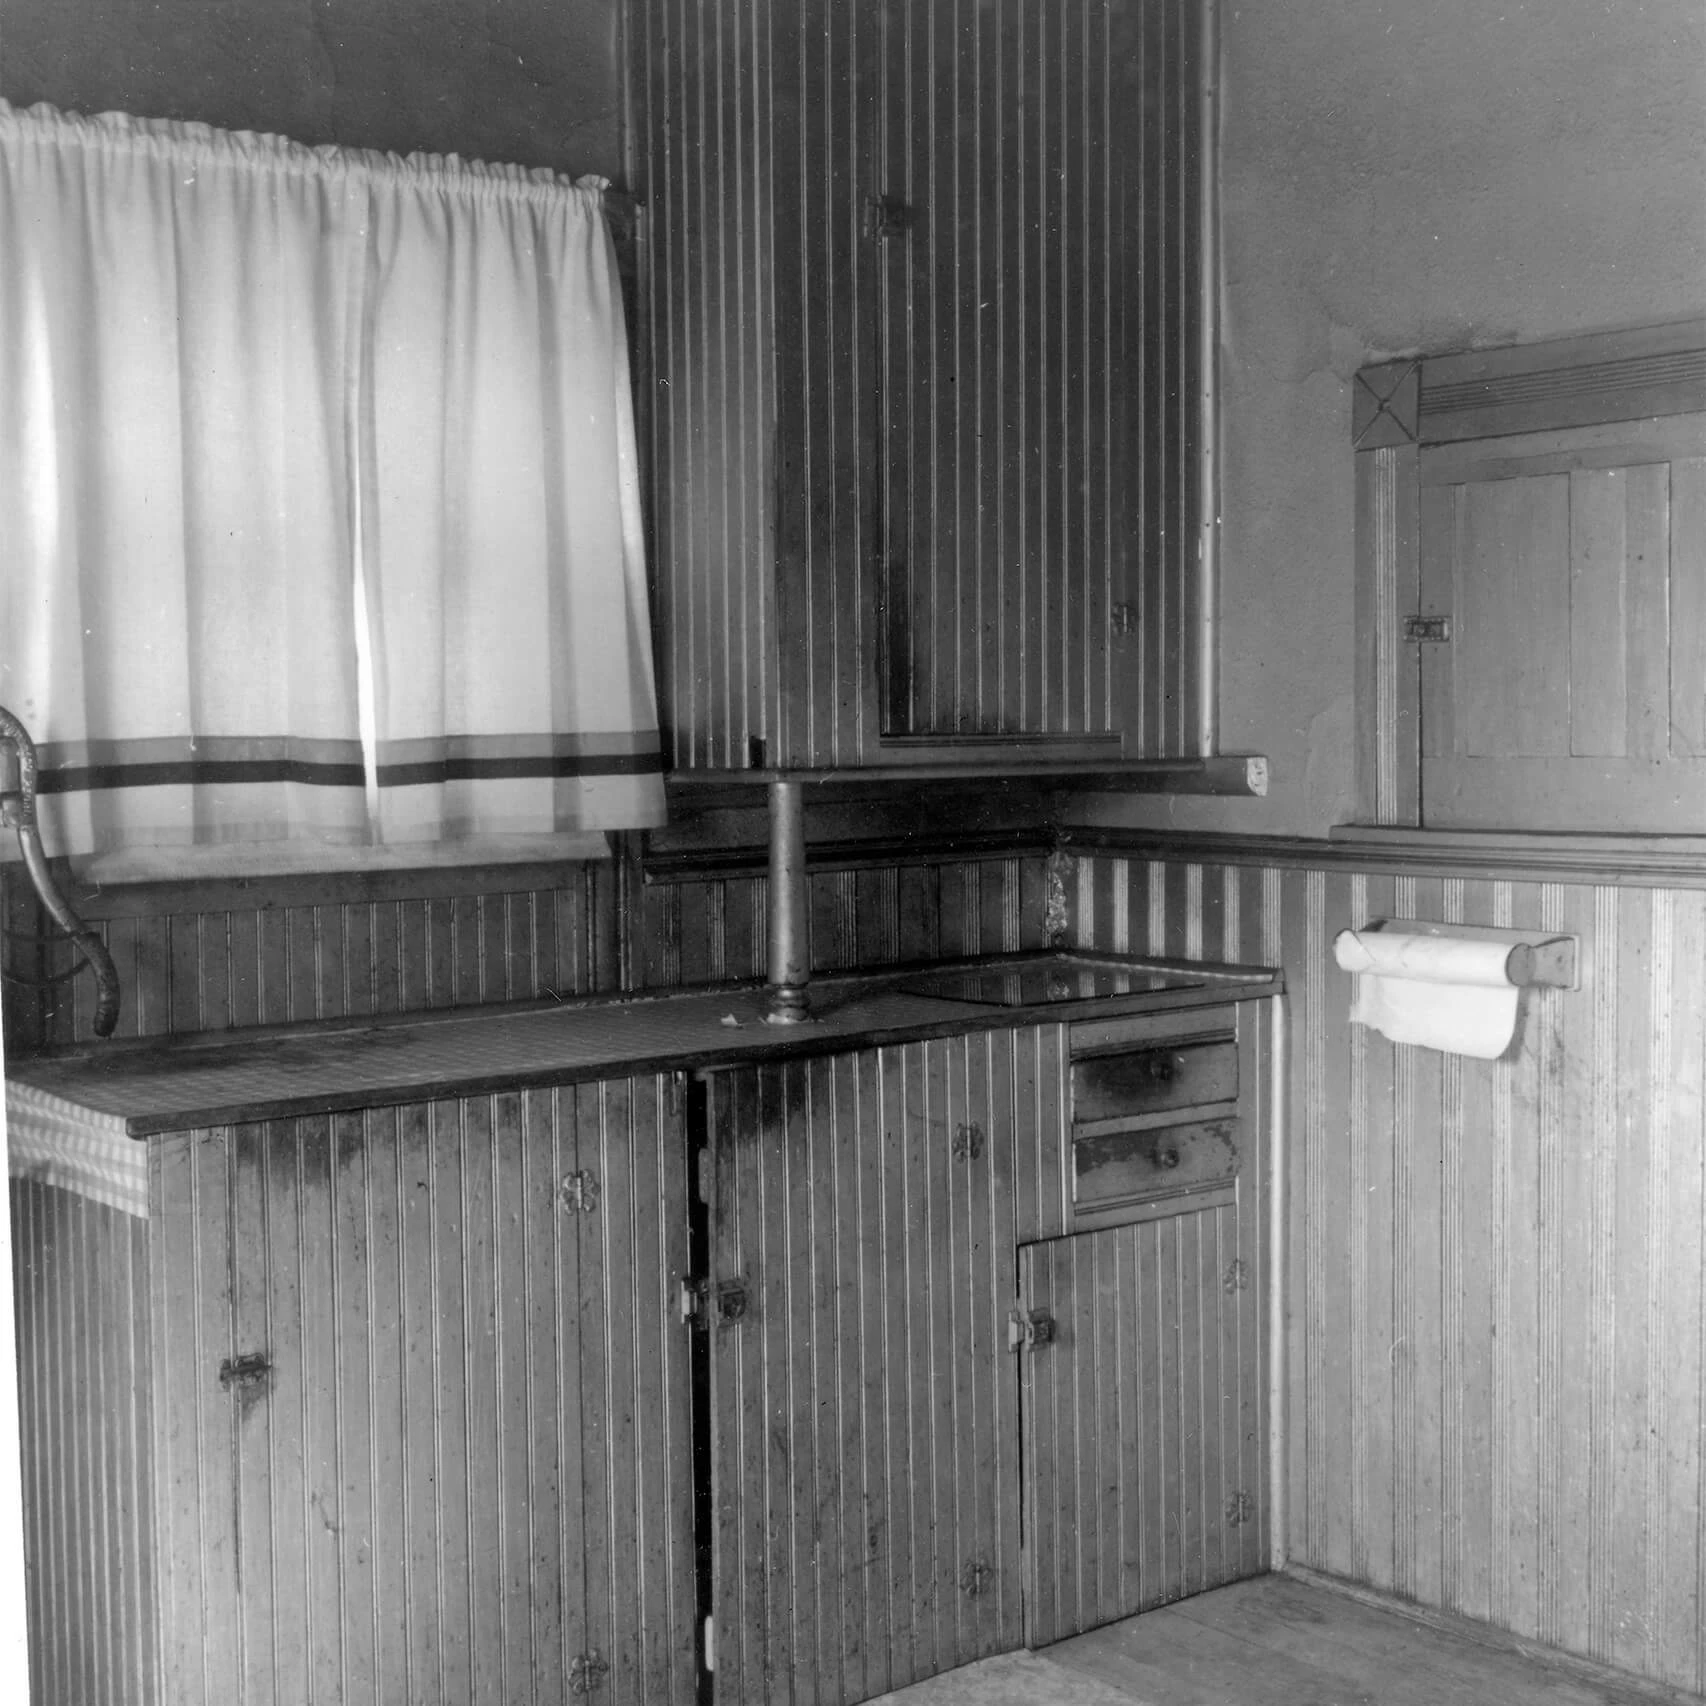 Black and white photo of a kitchen. It is almost entirely wood paneling, with a vertical pattern. There are white curtains in the upper left corner and the handle of a well pump is just visible on the left edge. There are several cabinet doors and a paper towel holder.